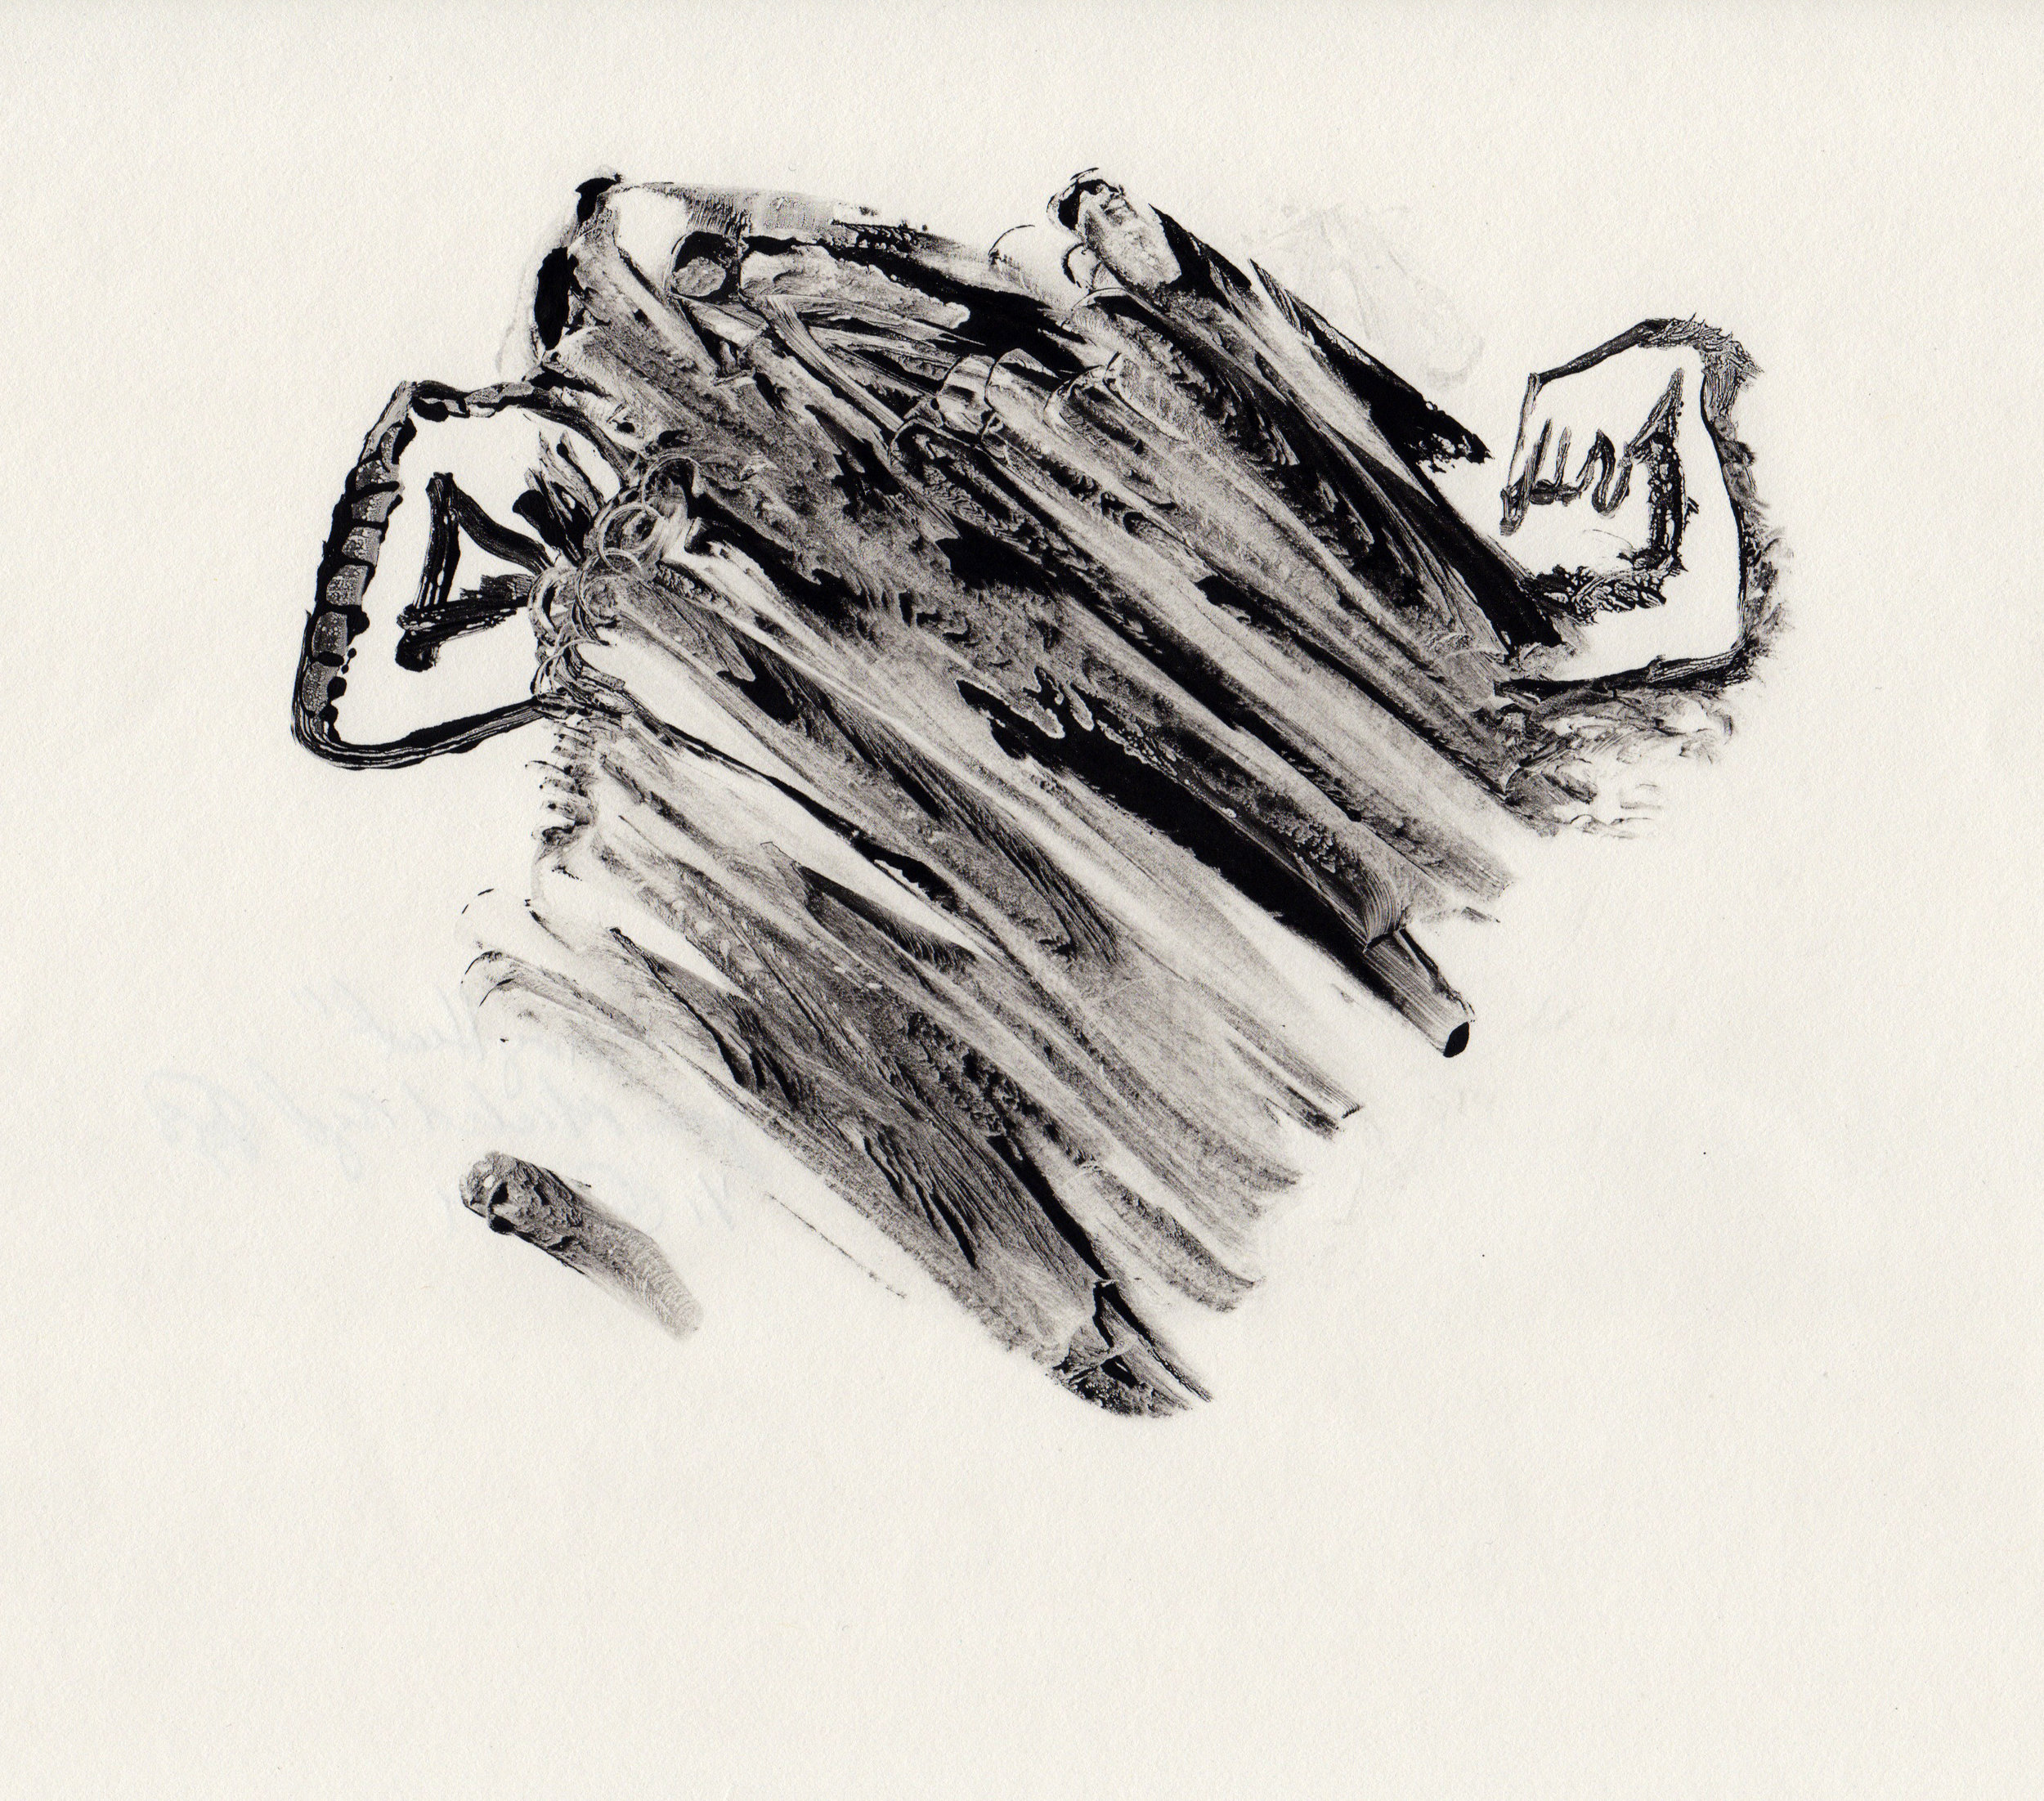 Strong Heart, 2014, gelatin monotype, 10x9 inches